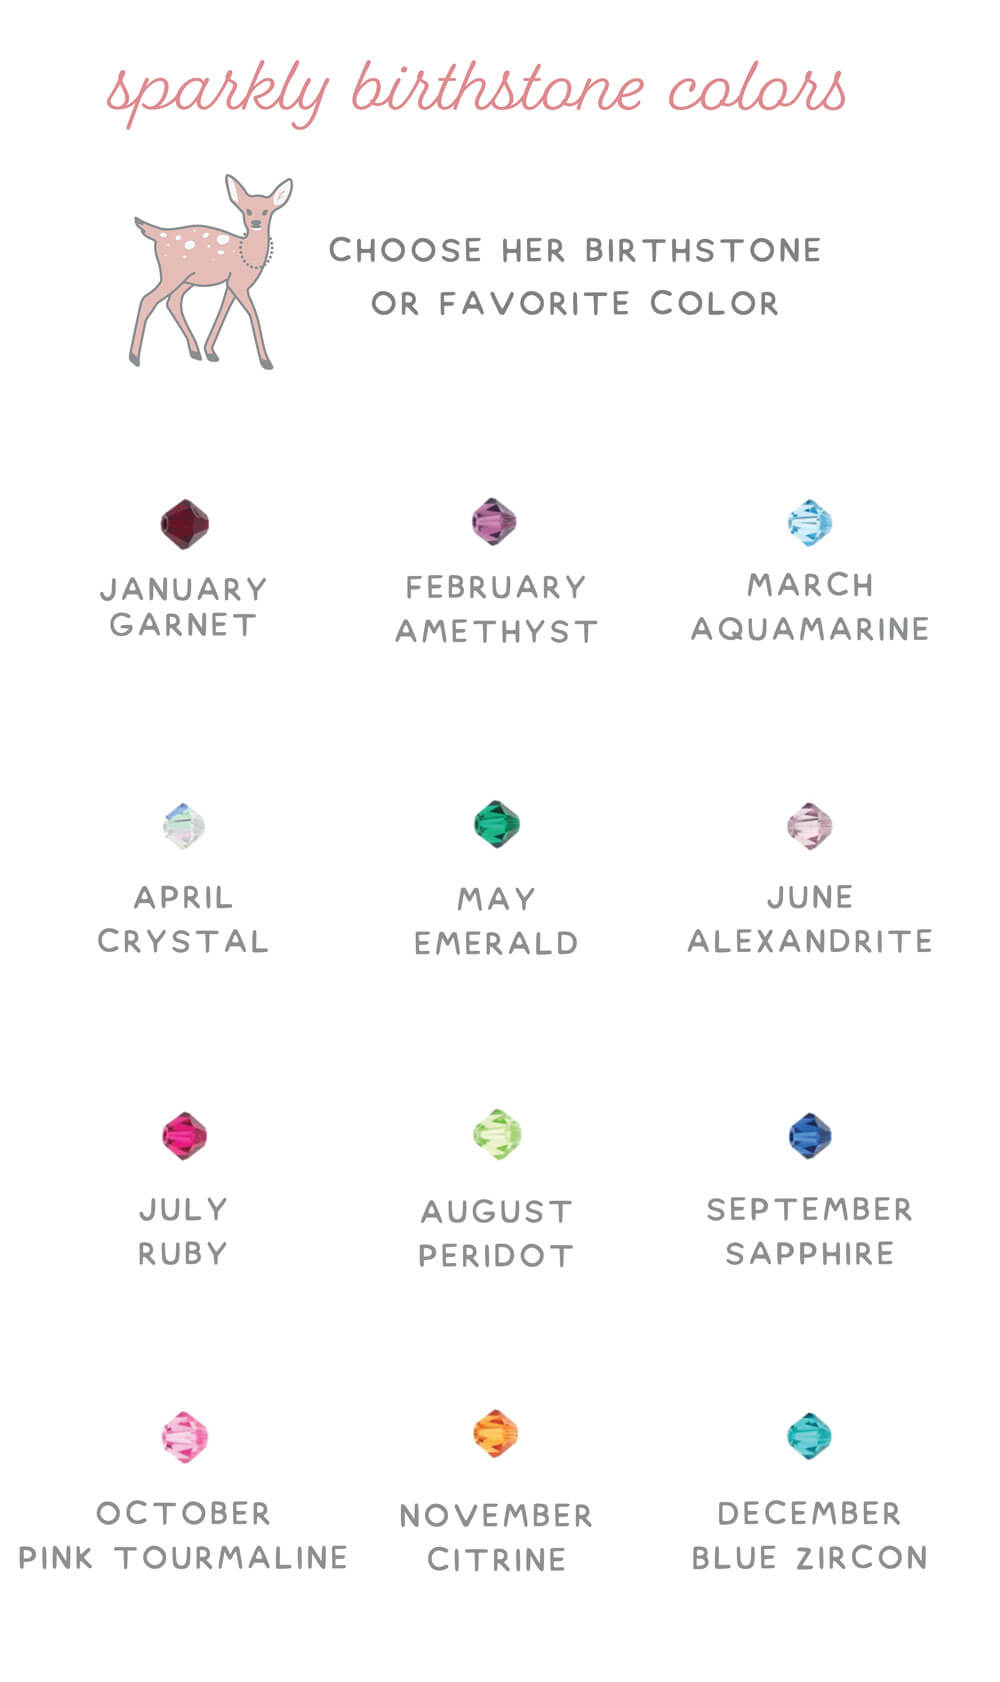 sparkly birthstone colors